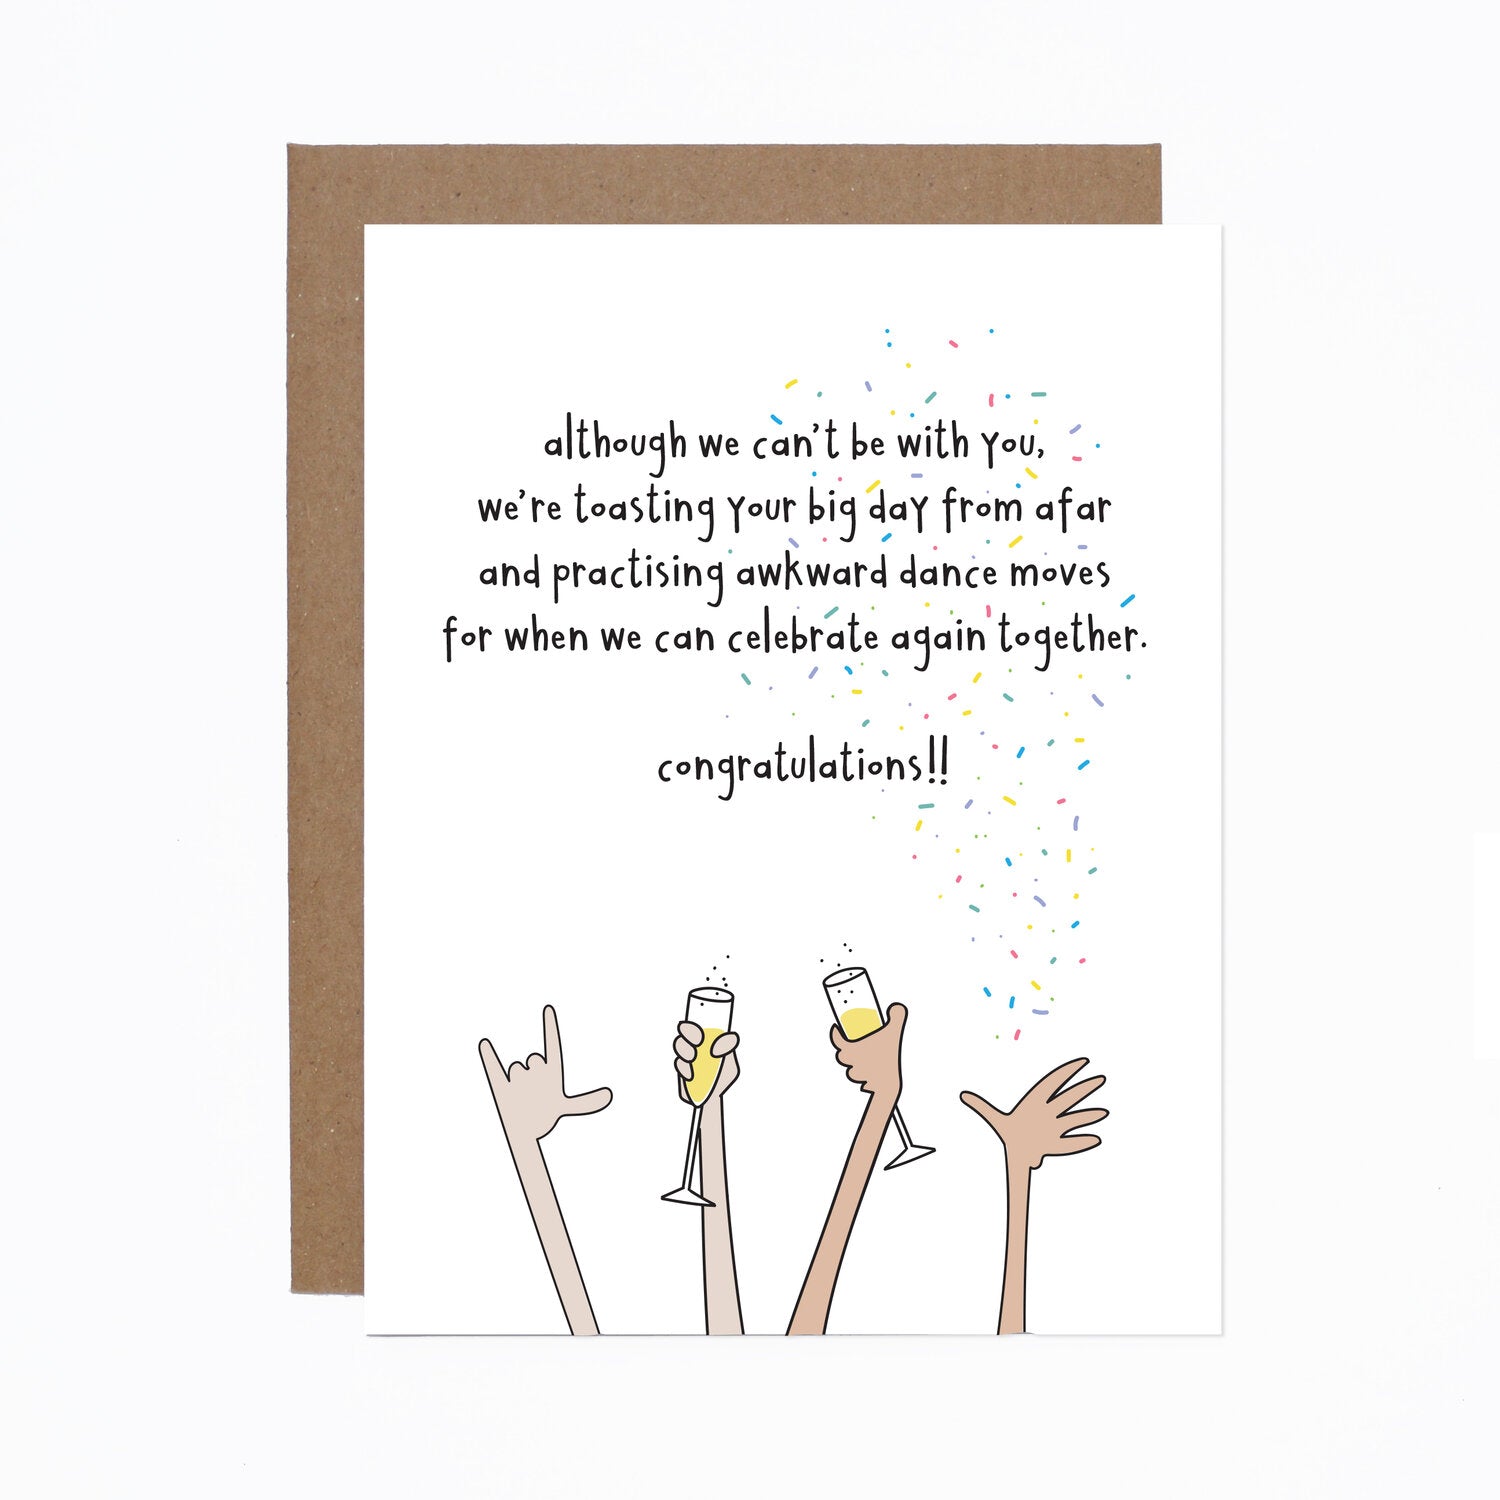 Missing Your Big Day card